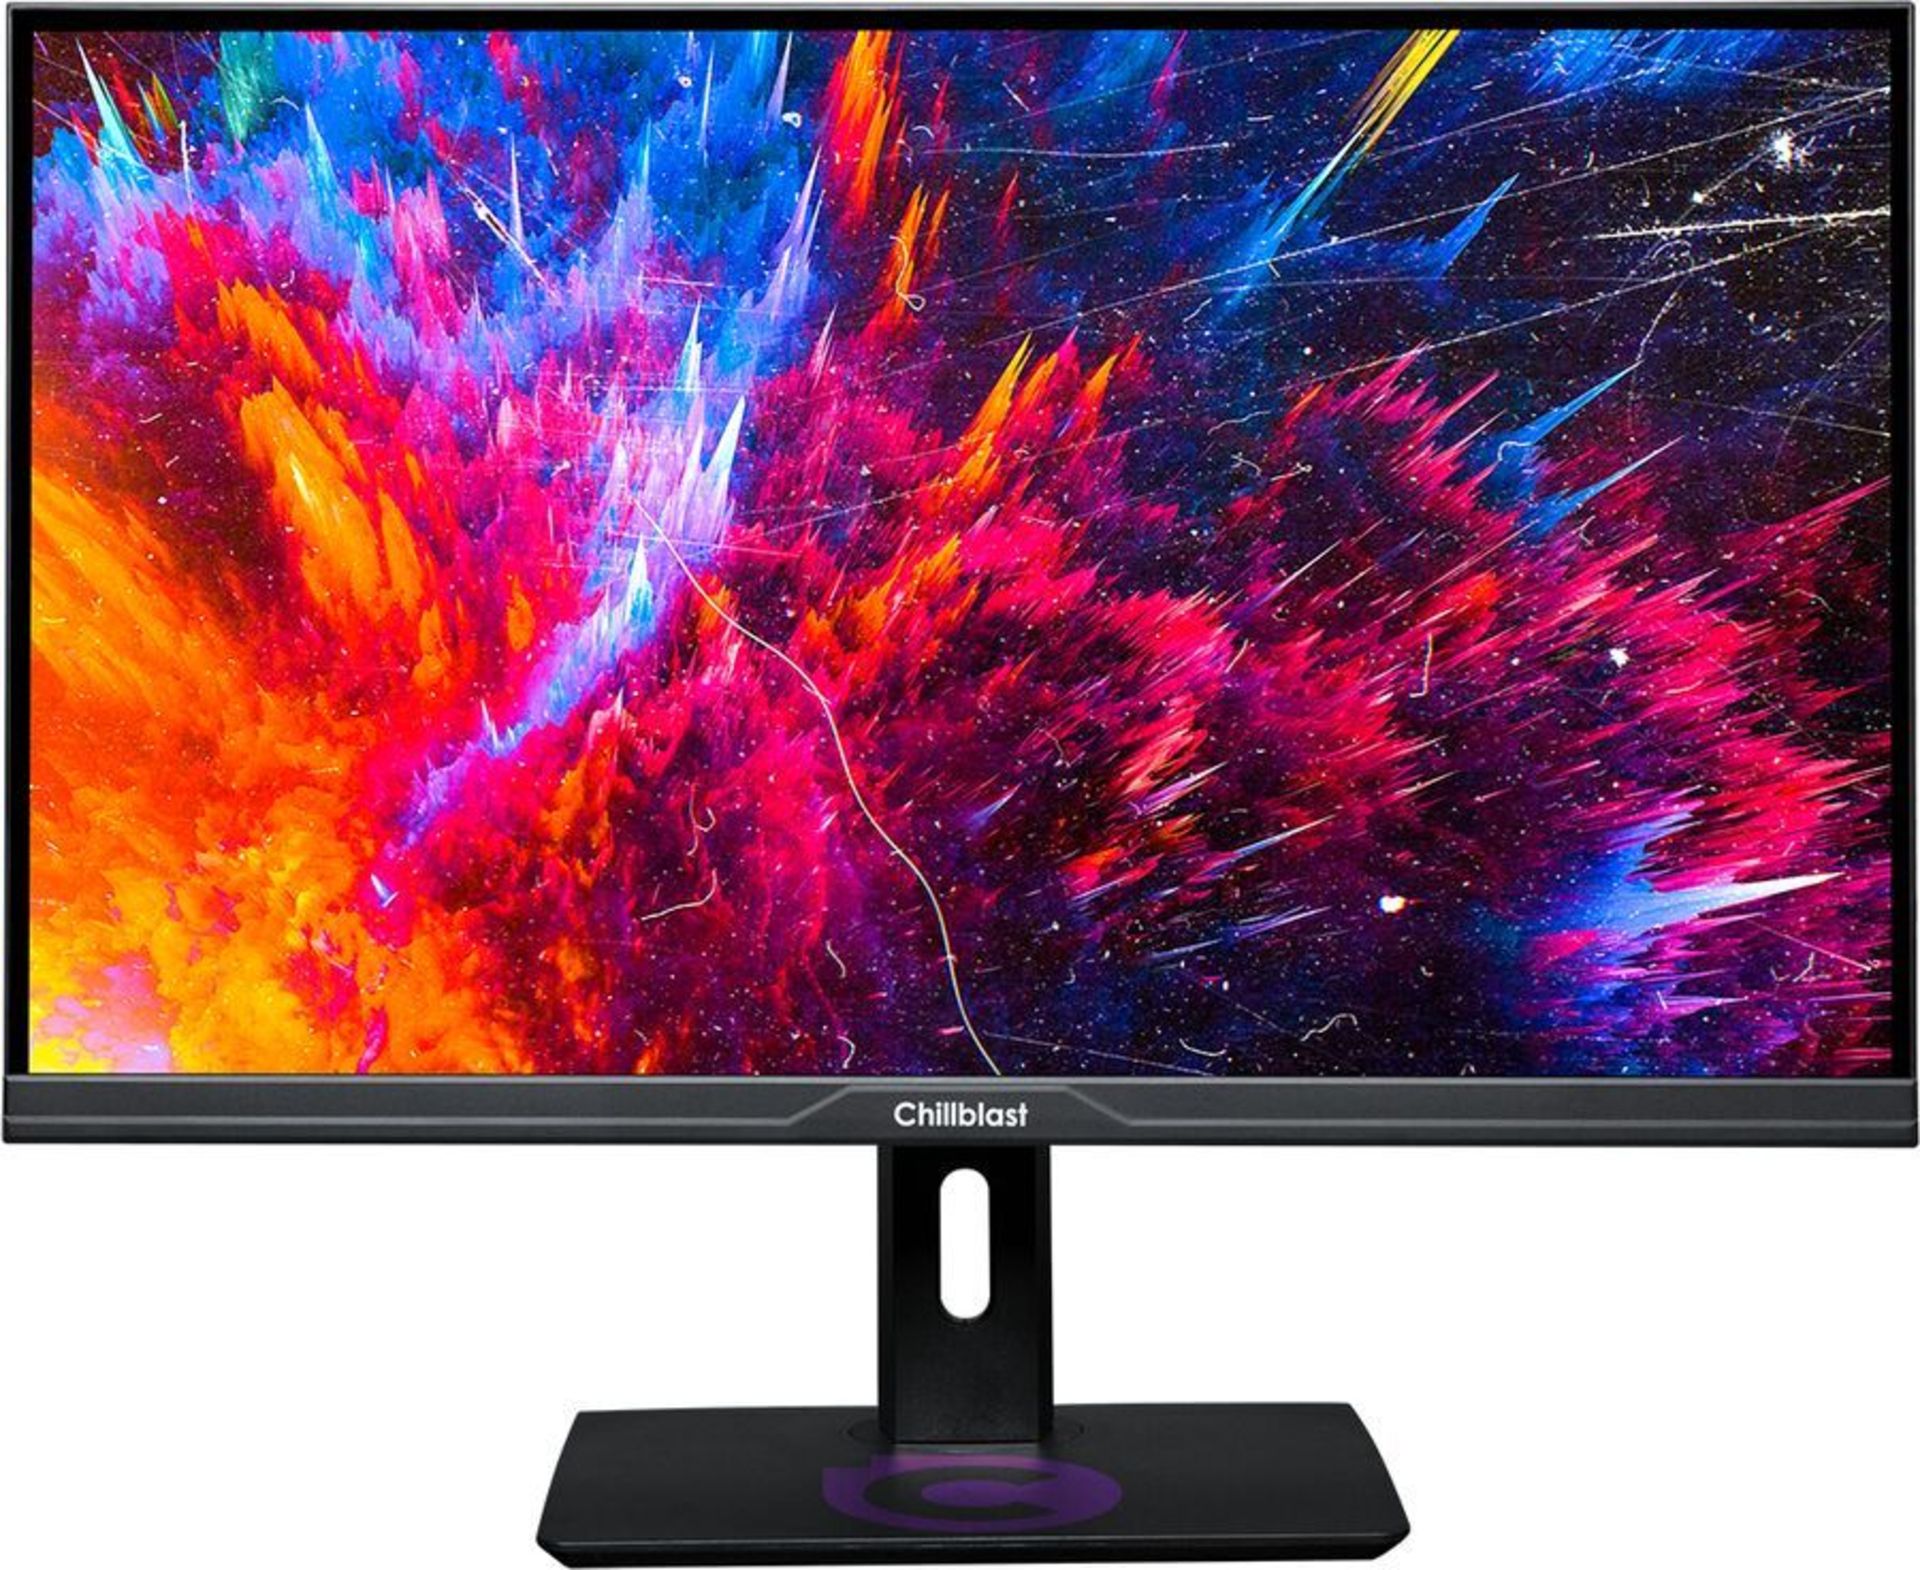 Chillblast 27QHD165V1 - 27" 2560x1440 IPS 165Hz Monitor. - P2. RRP £550.00. Going up a resolution is - Image 2 of 2